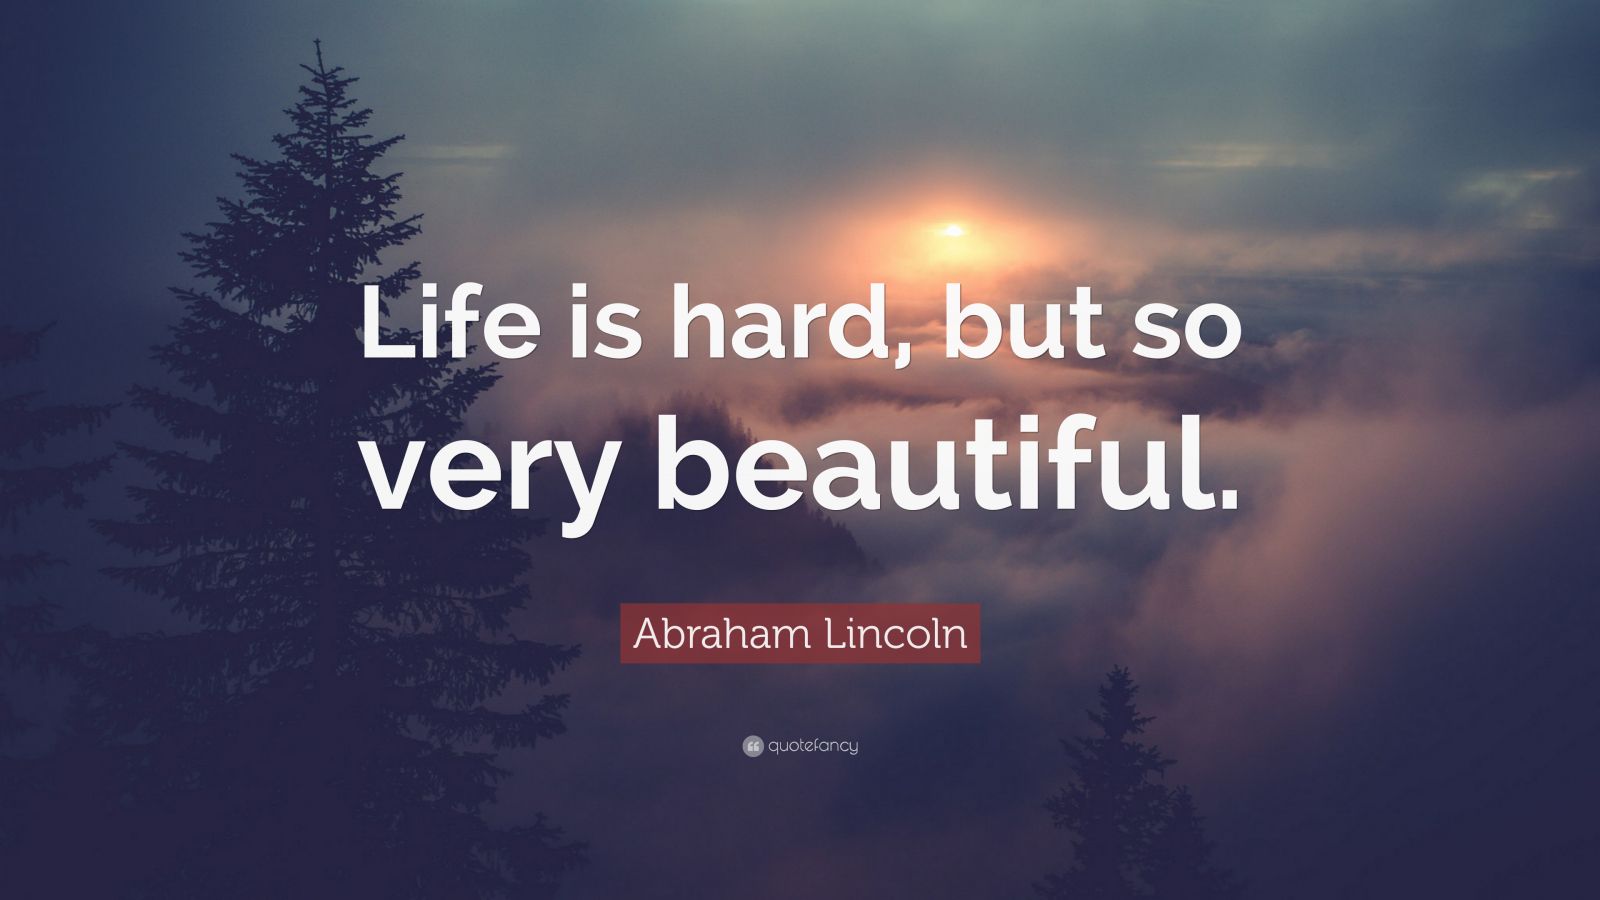 Abraham Lincoln Quote: “Life is hard, but so very beautiful.” (28